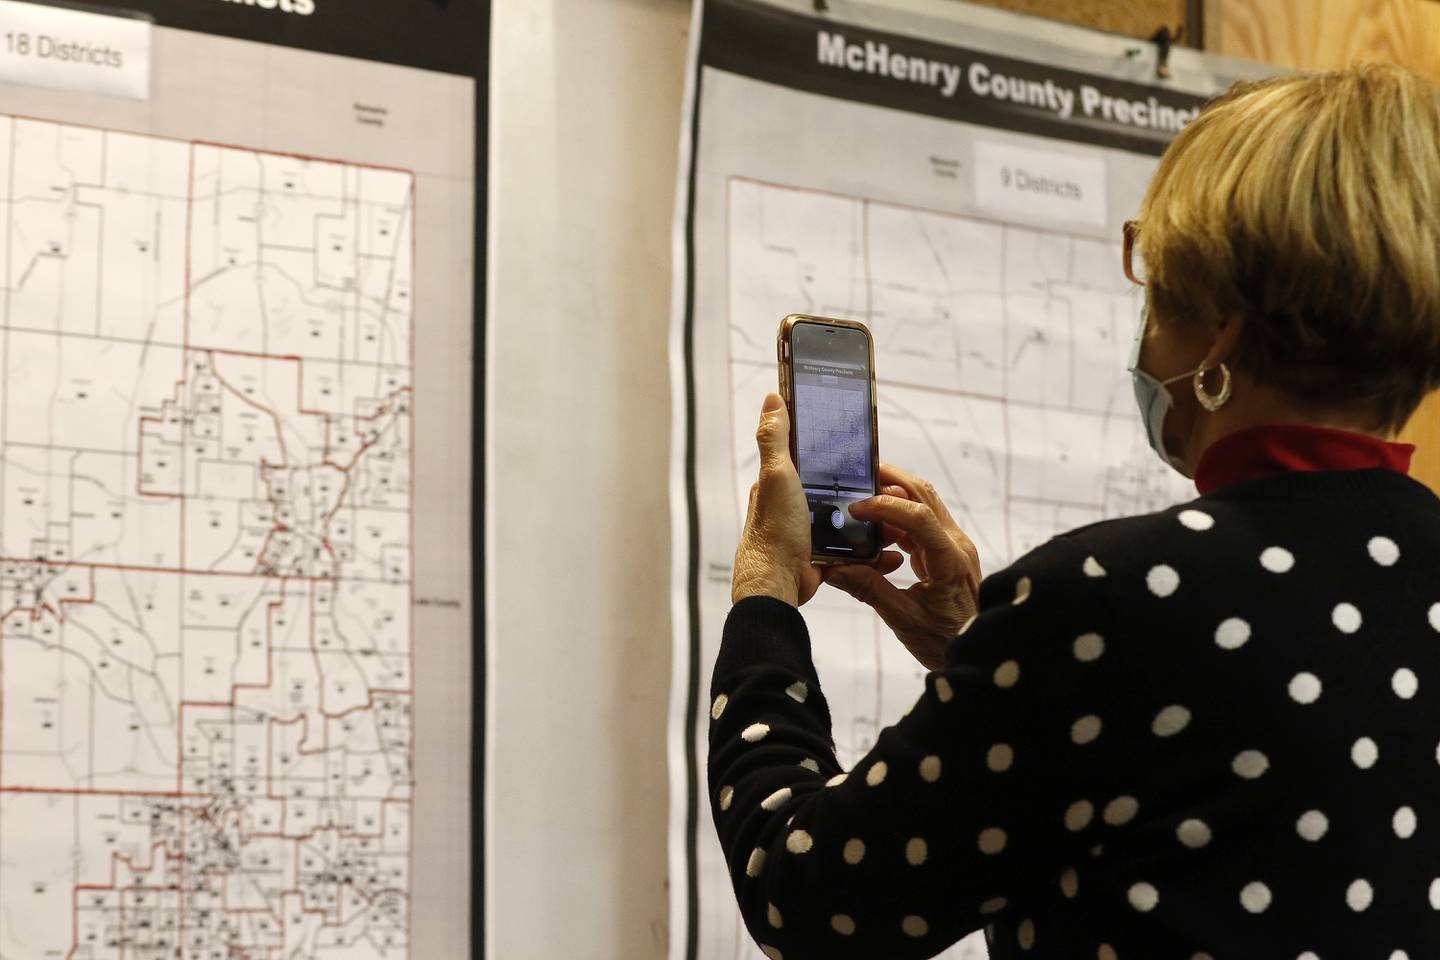 McHenry County Board member Kay Bates takes a photo of two proposed County Board district maps presented during a McHenry County Administrative Services Committee meeting on Wednesday, May 5, 2021, in Woodstock.